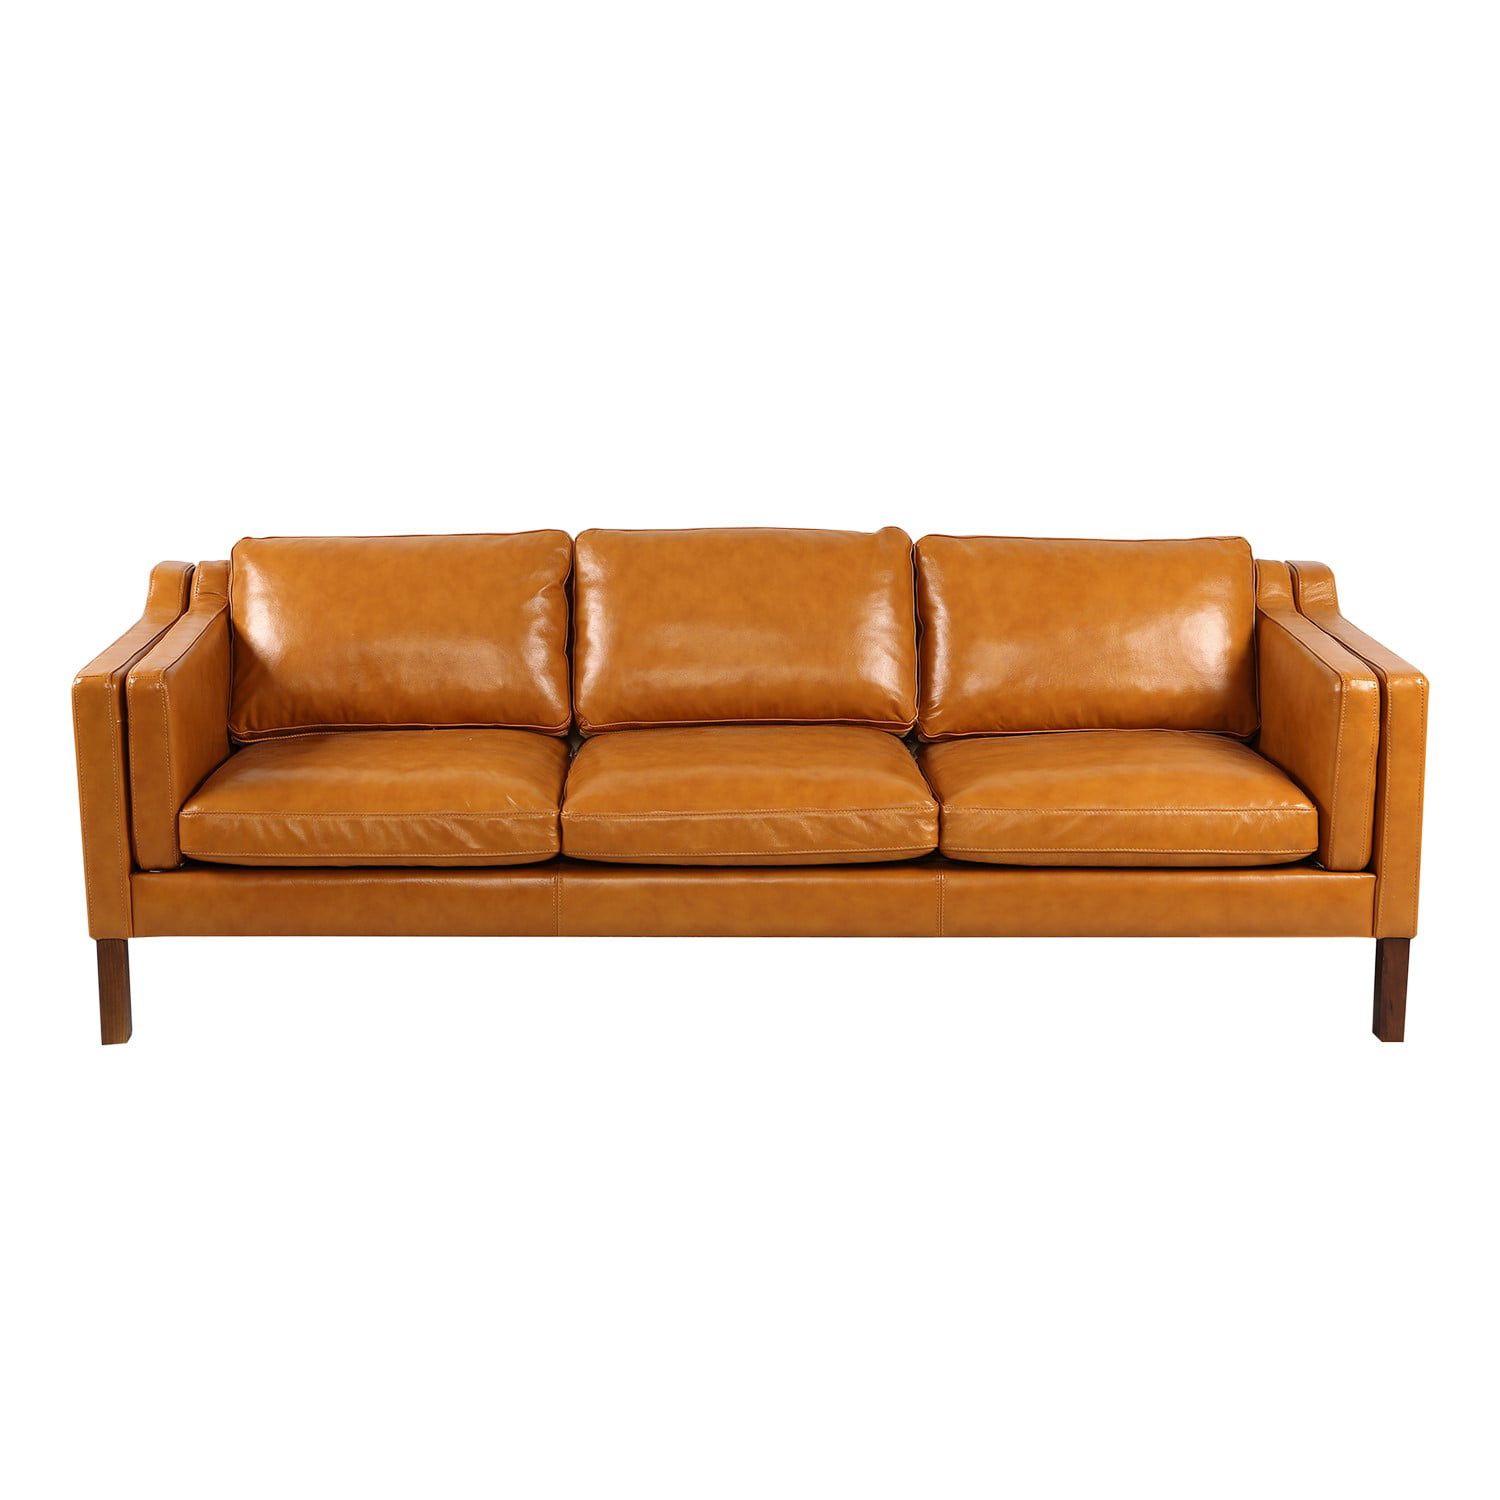 Kardiel Monroe Mid Century Modern Sofa 3 Seat, Tan Aniline Leather Intended For Mid Century Modern Sofas (Gallery 8 of 20)